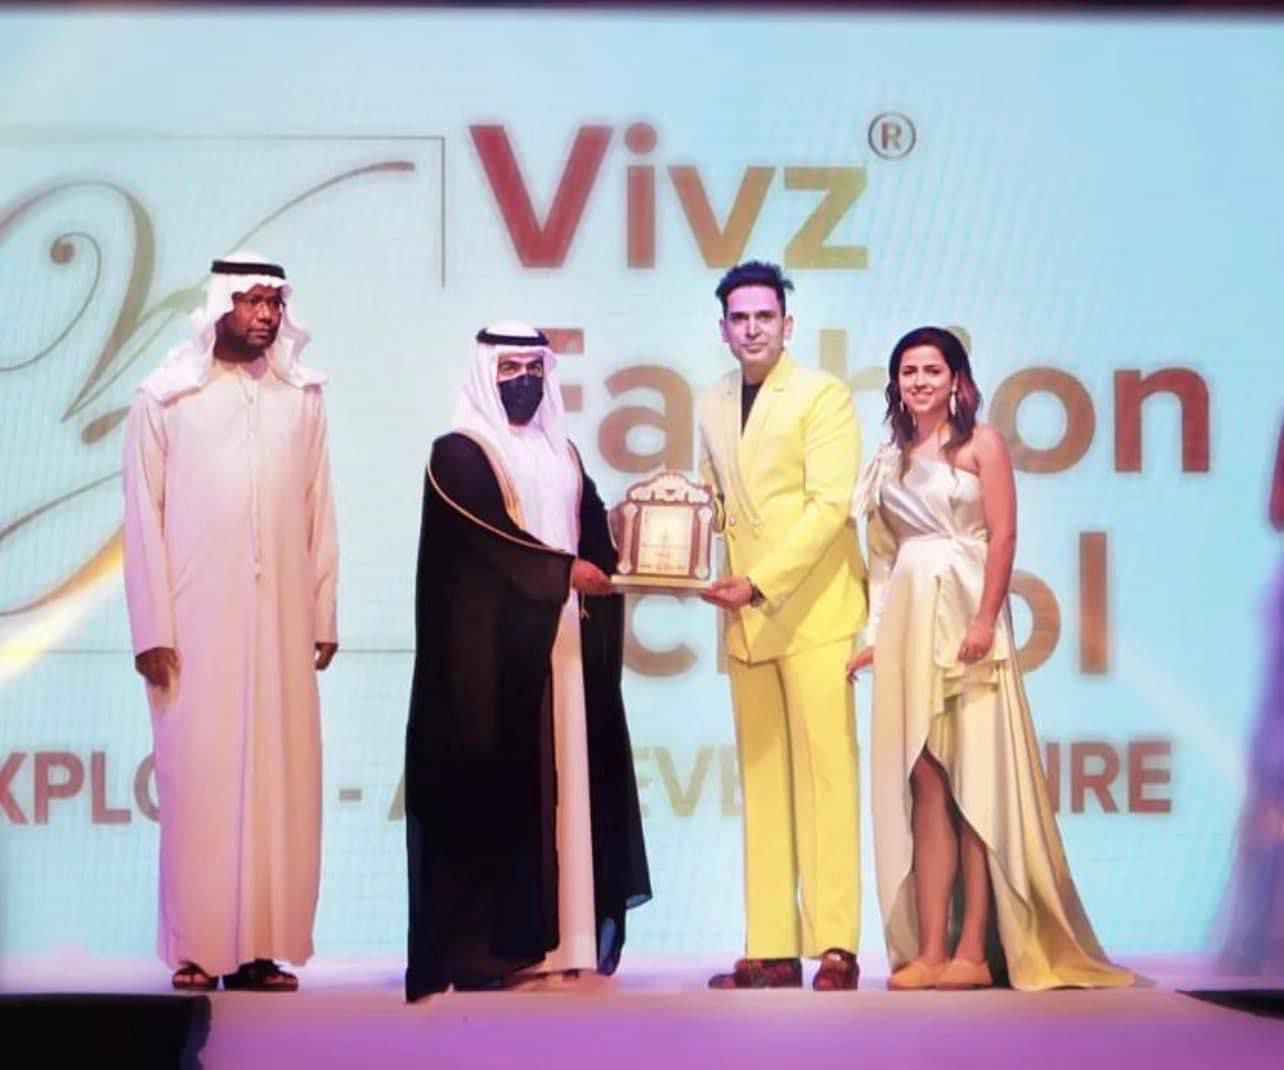 Vivz Fashion School presents visionary and excellence awards in London in June